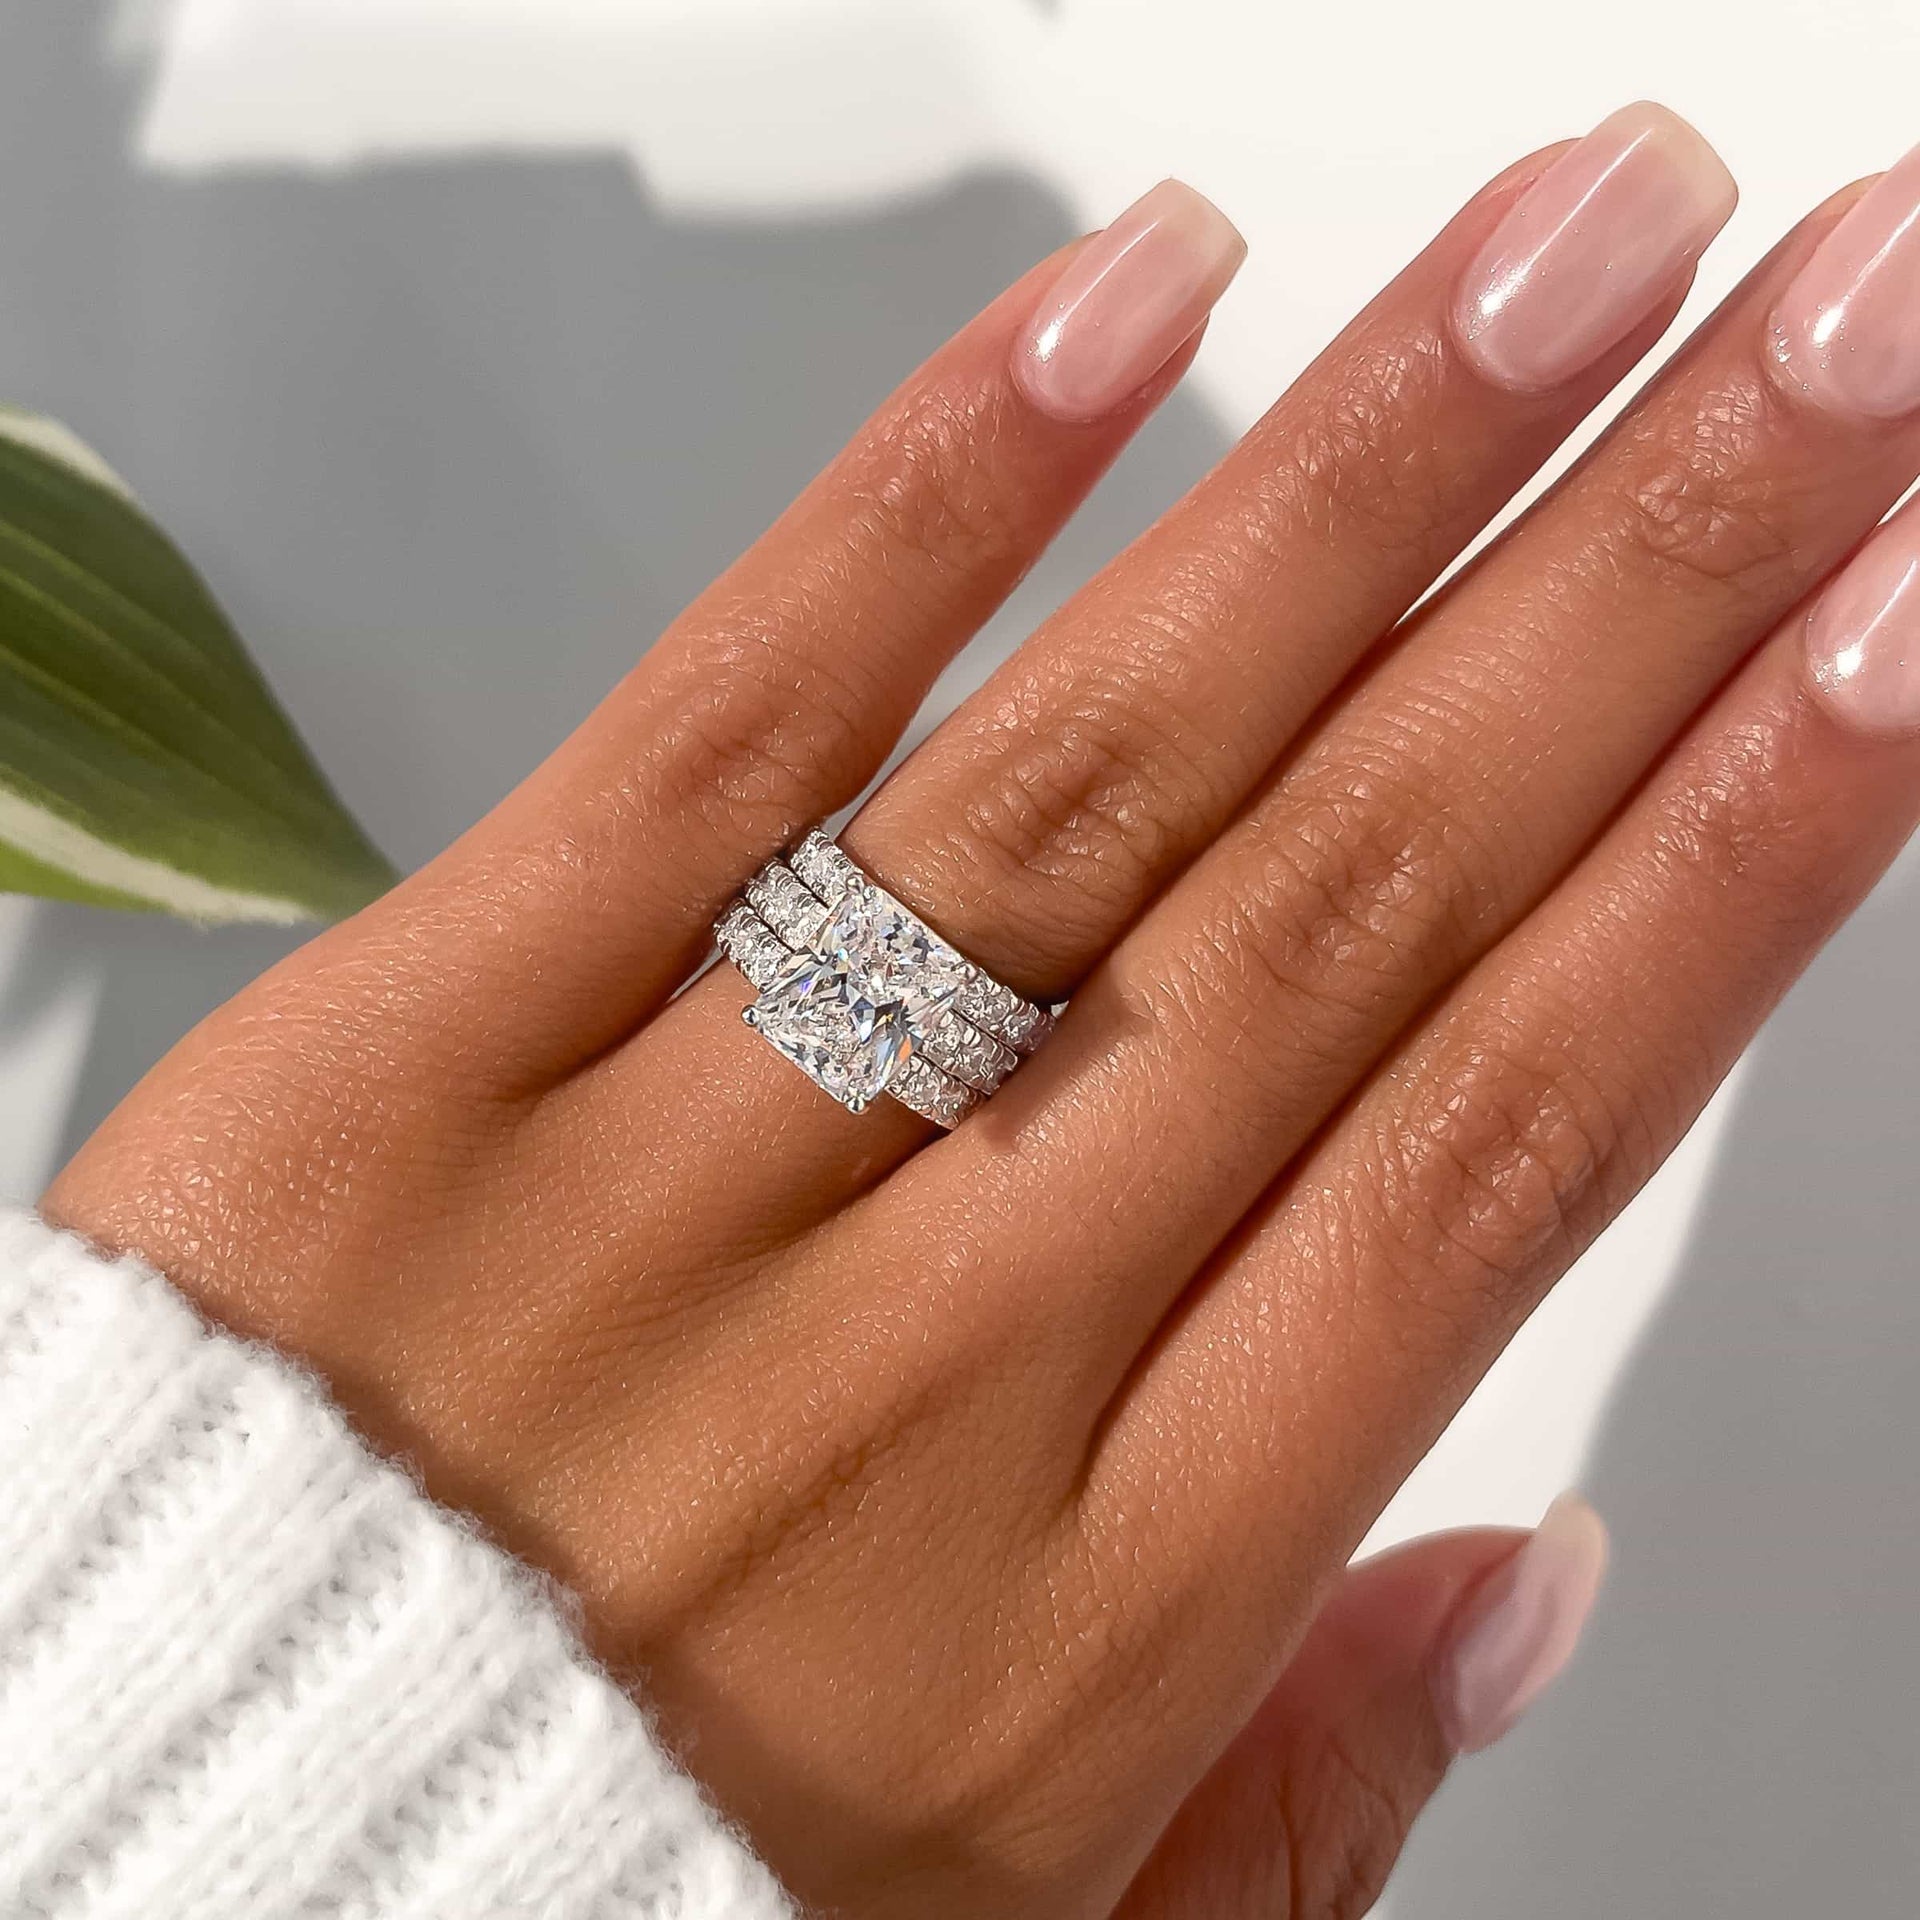 set of two eternity bands modeled with radiant cut engagement ring on female hand with neutral nails and white sweater